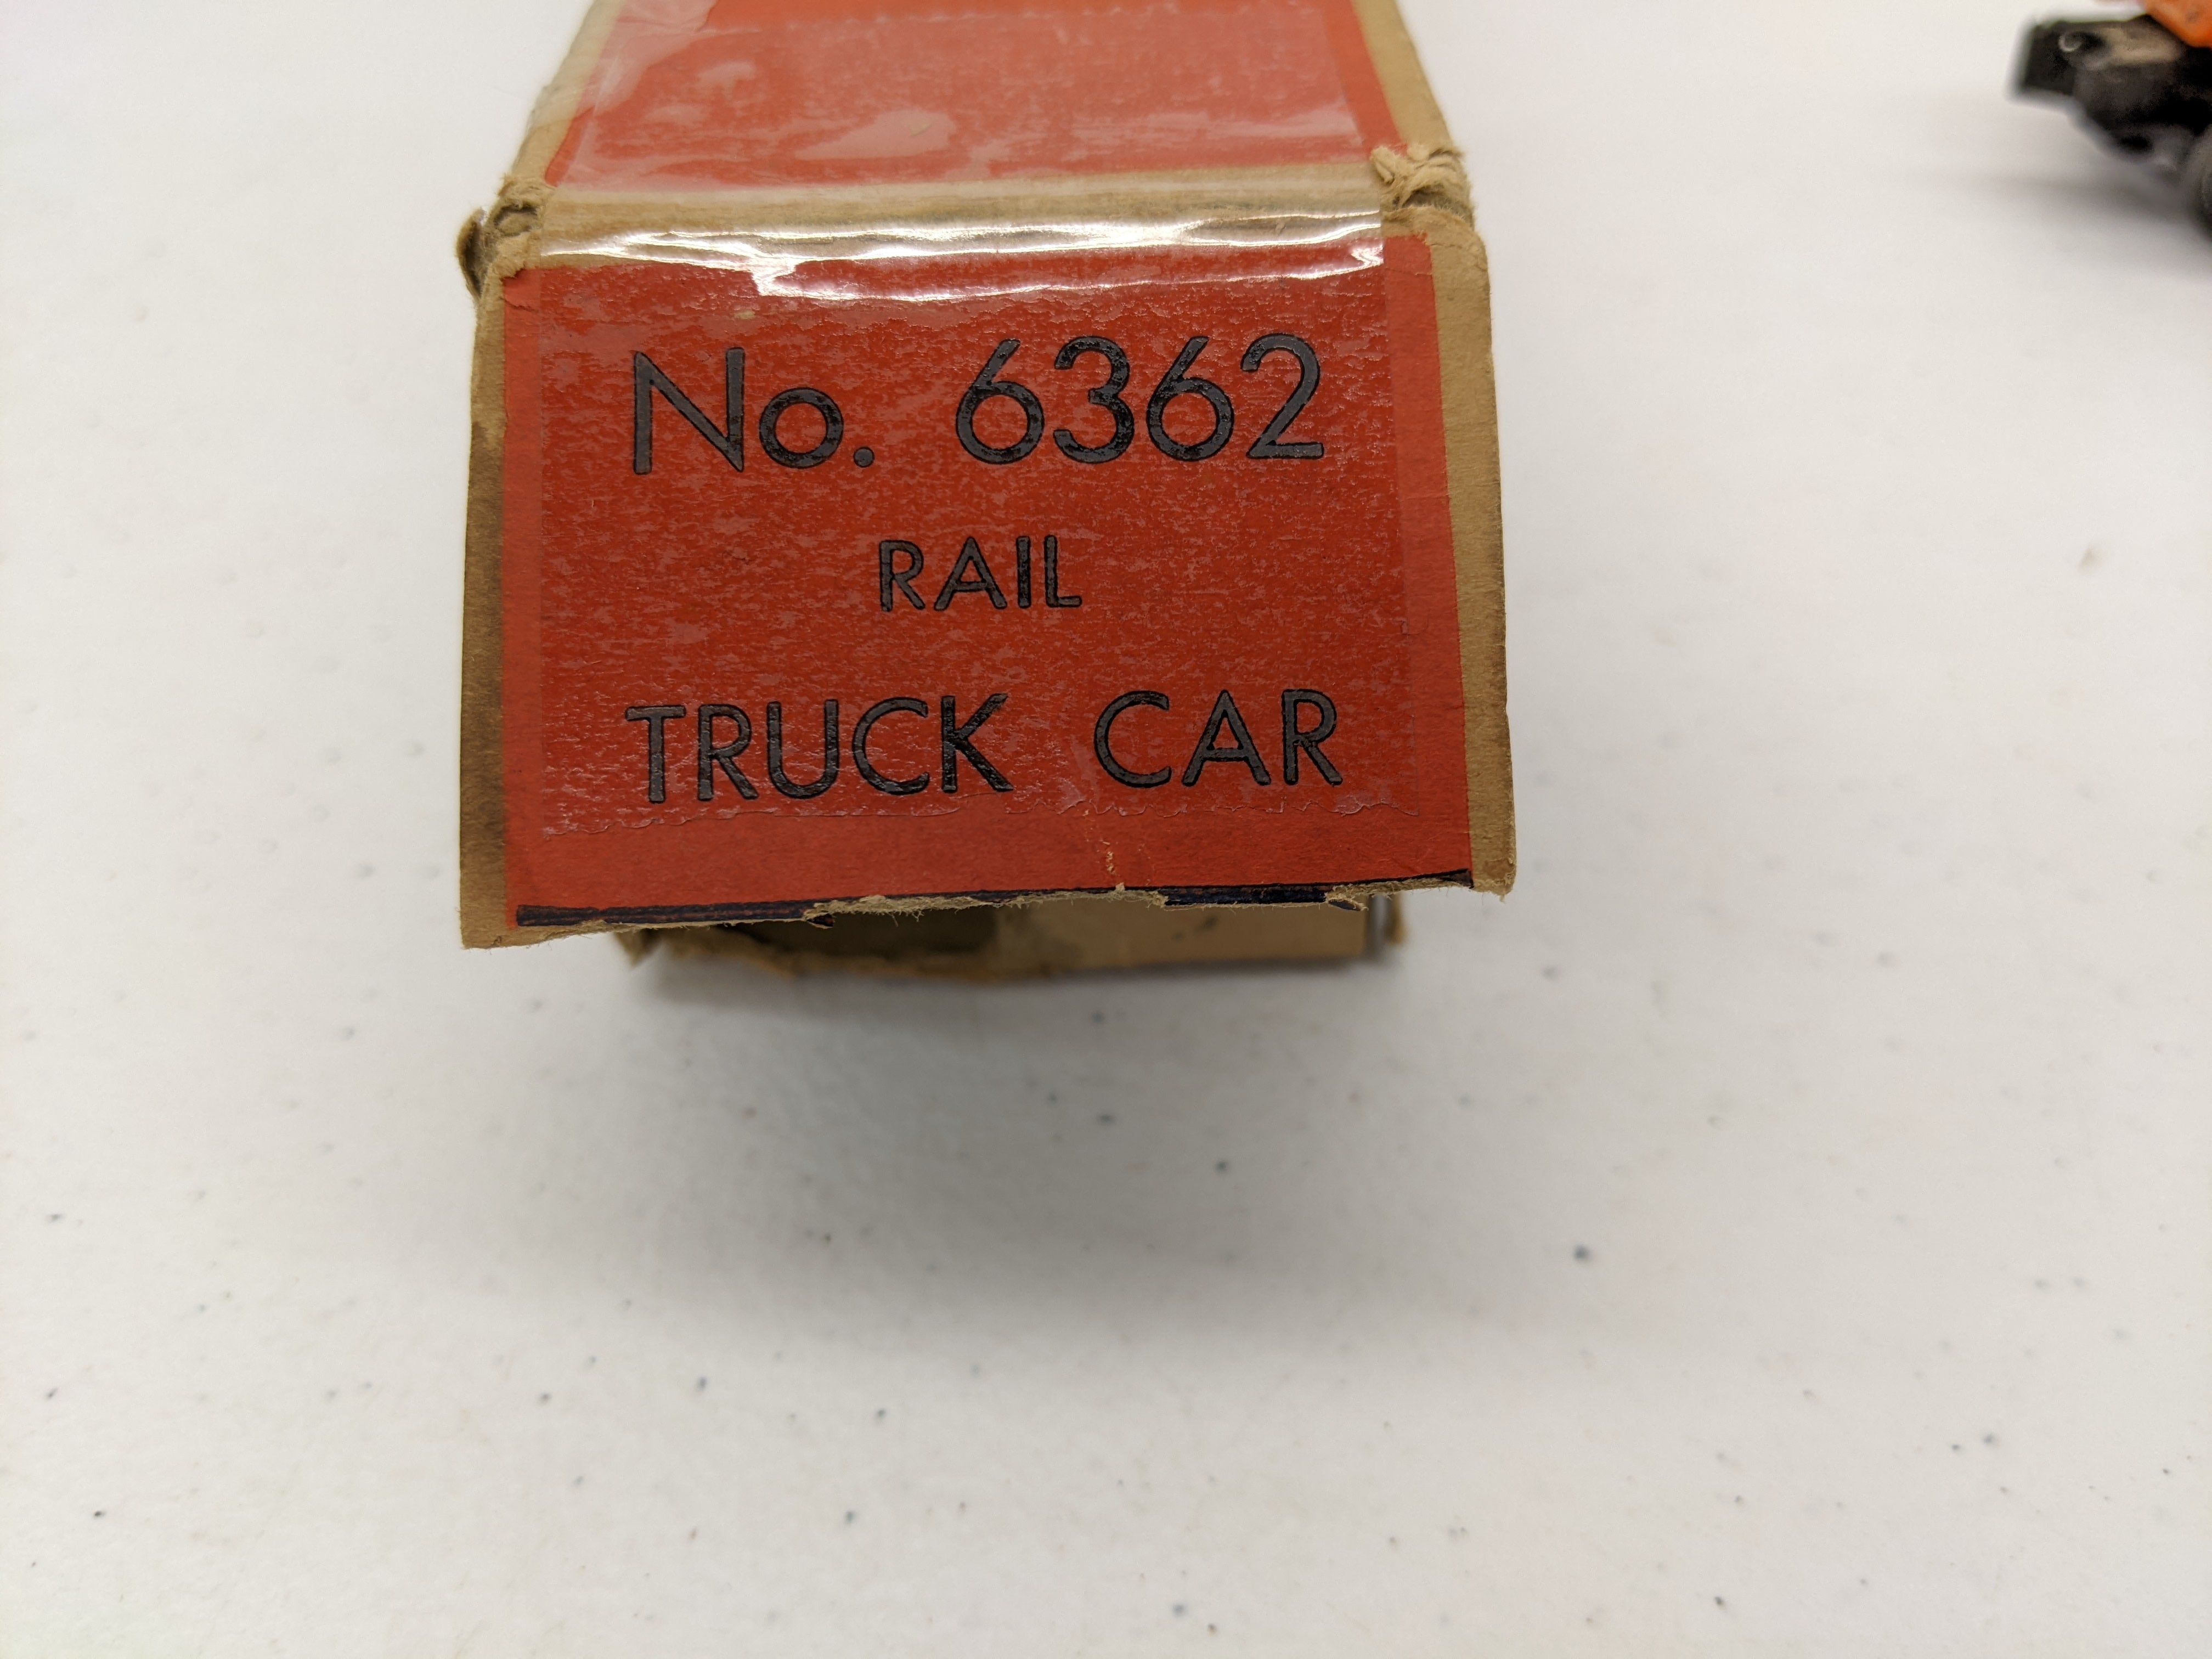 USED Lionel 6362 O Scale, Rail Truck Car, Lionel Lines #636255